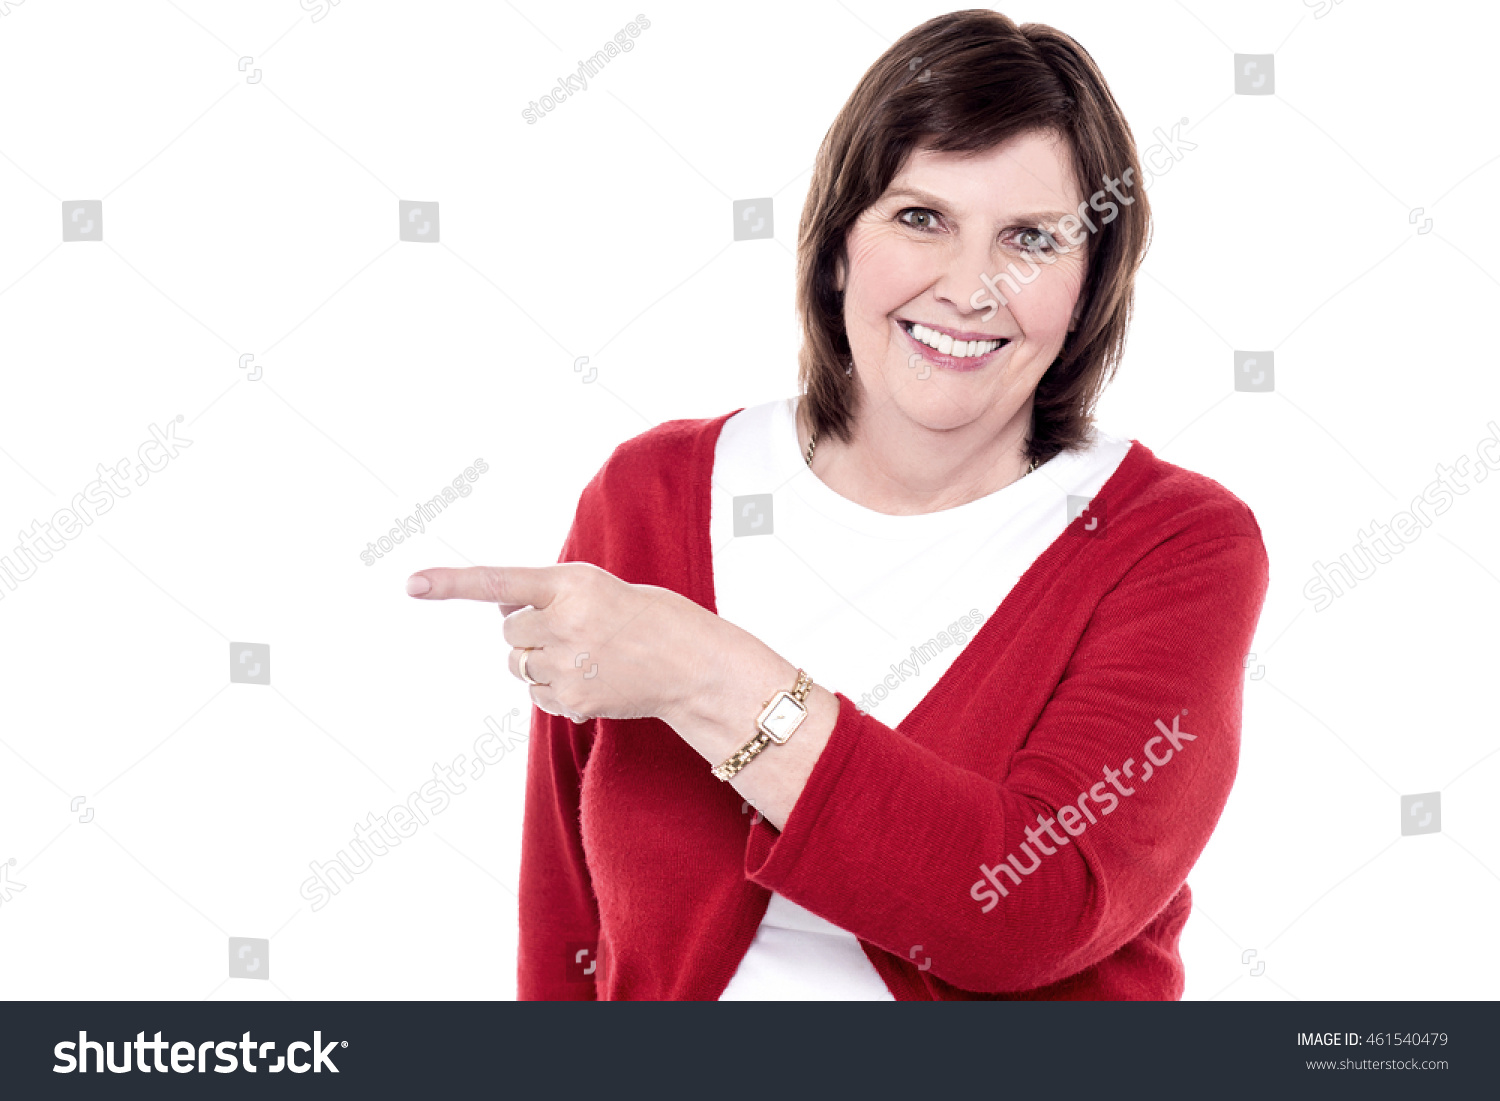 Attractive Mature Lady Pointing Towards Copy Foto Stok 461540479